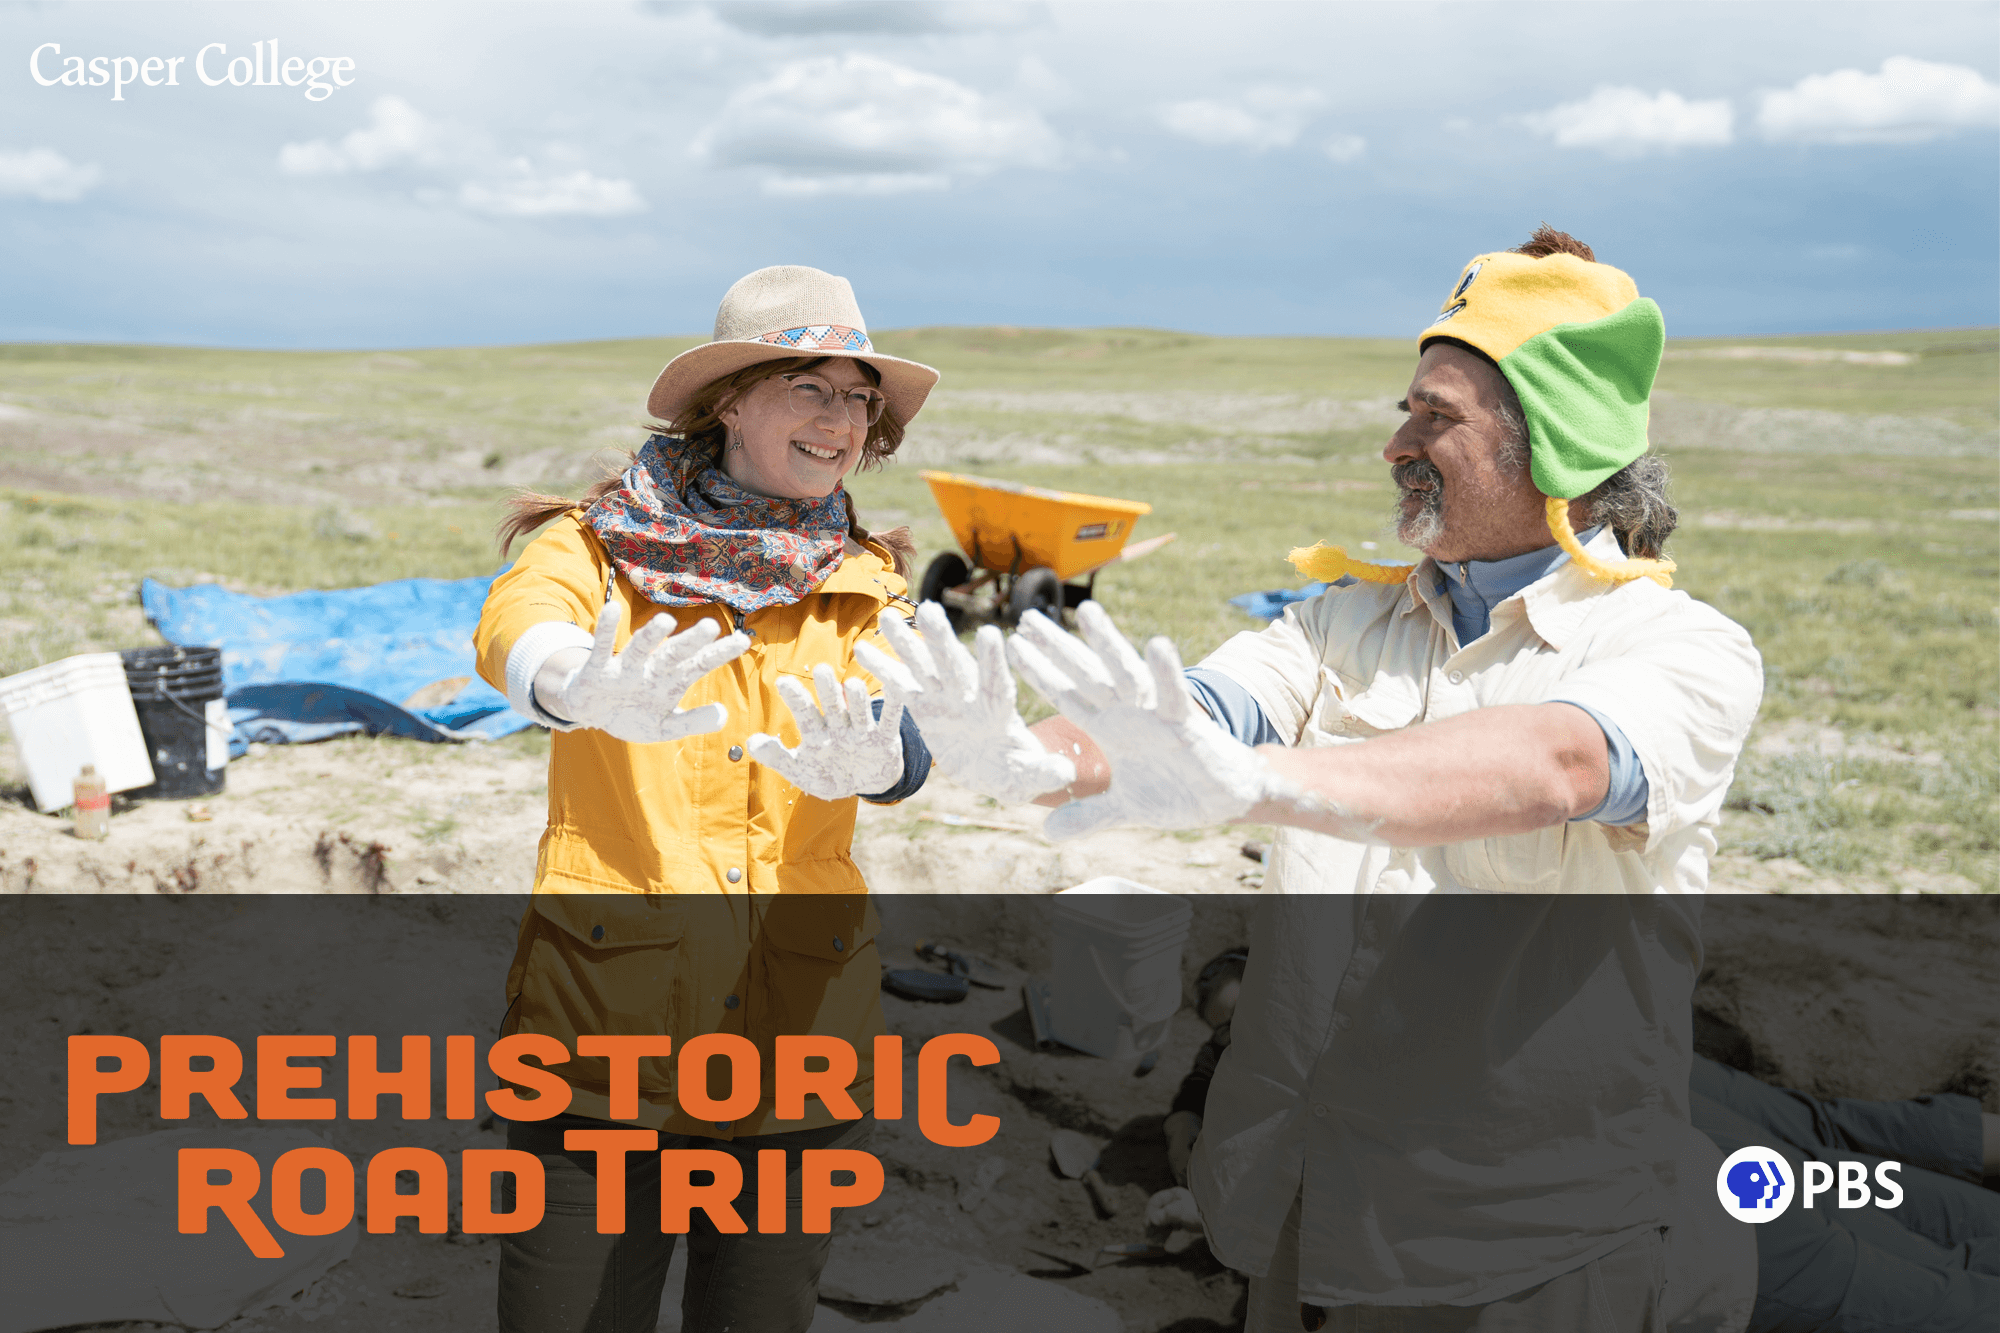 Photograph of two people at a dinosaur dig site with the words "Prehistoric Road Trip."